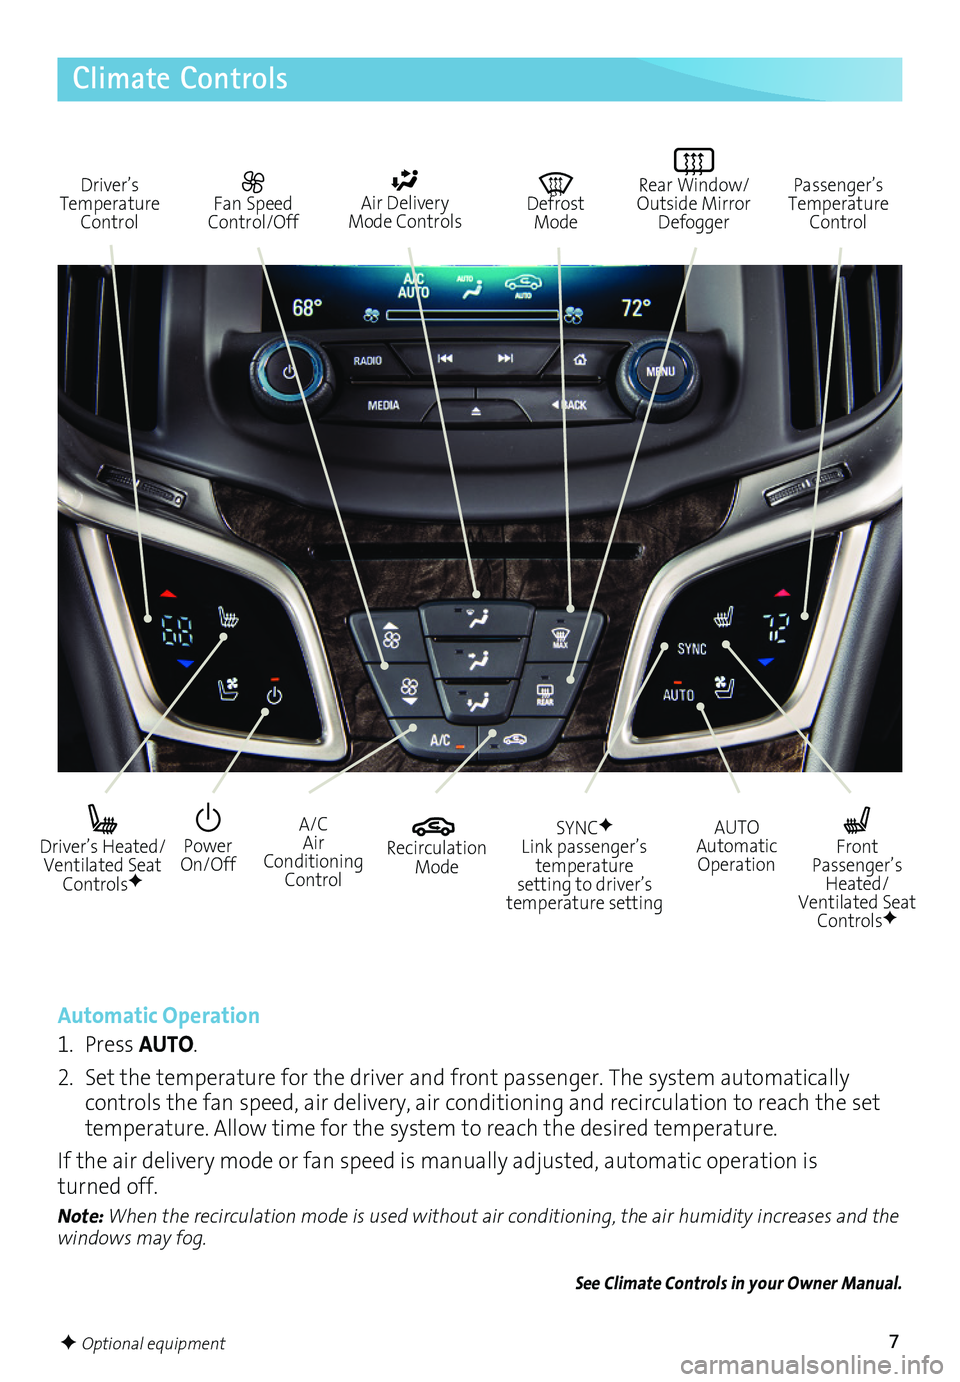 BUICK LACROSSE 2016  Get To Know Guide 7
Climate Controls
 Driver’s Heated/Ventilated Seat ControlsF
  
Power On/Off
A/C Air Conditioning Control
AUTO Automatic Operation
  Recirculation Mode
Automatic Operation
1. Press AUTO.
2. Set the